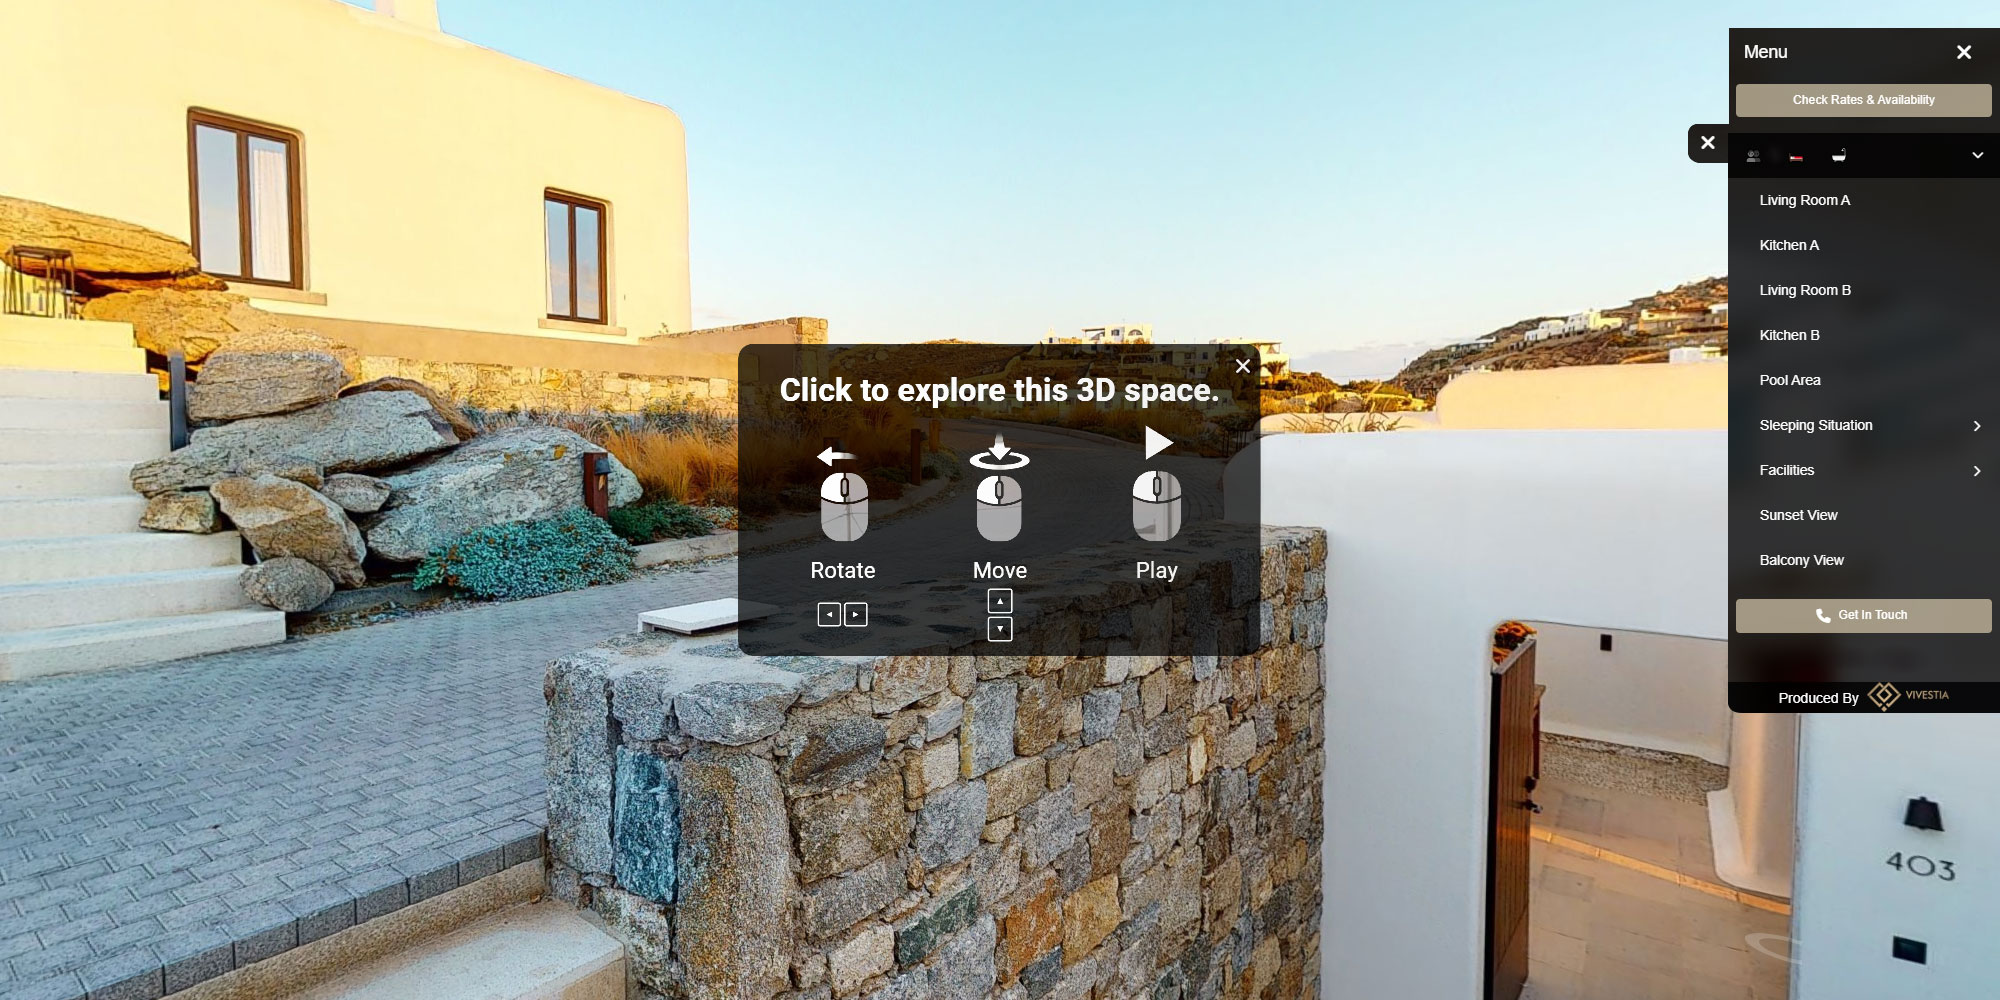 Step Inside Before You Check In: Exploring Hotel Virtual Tours-Vivestia | Risk-Free Villas, Hotels and Cruises in VR